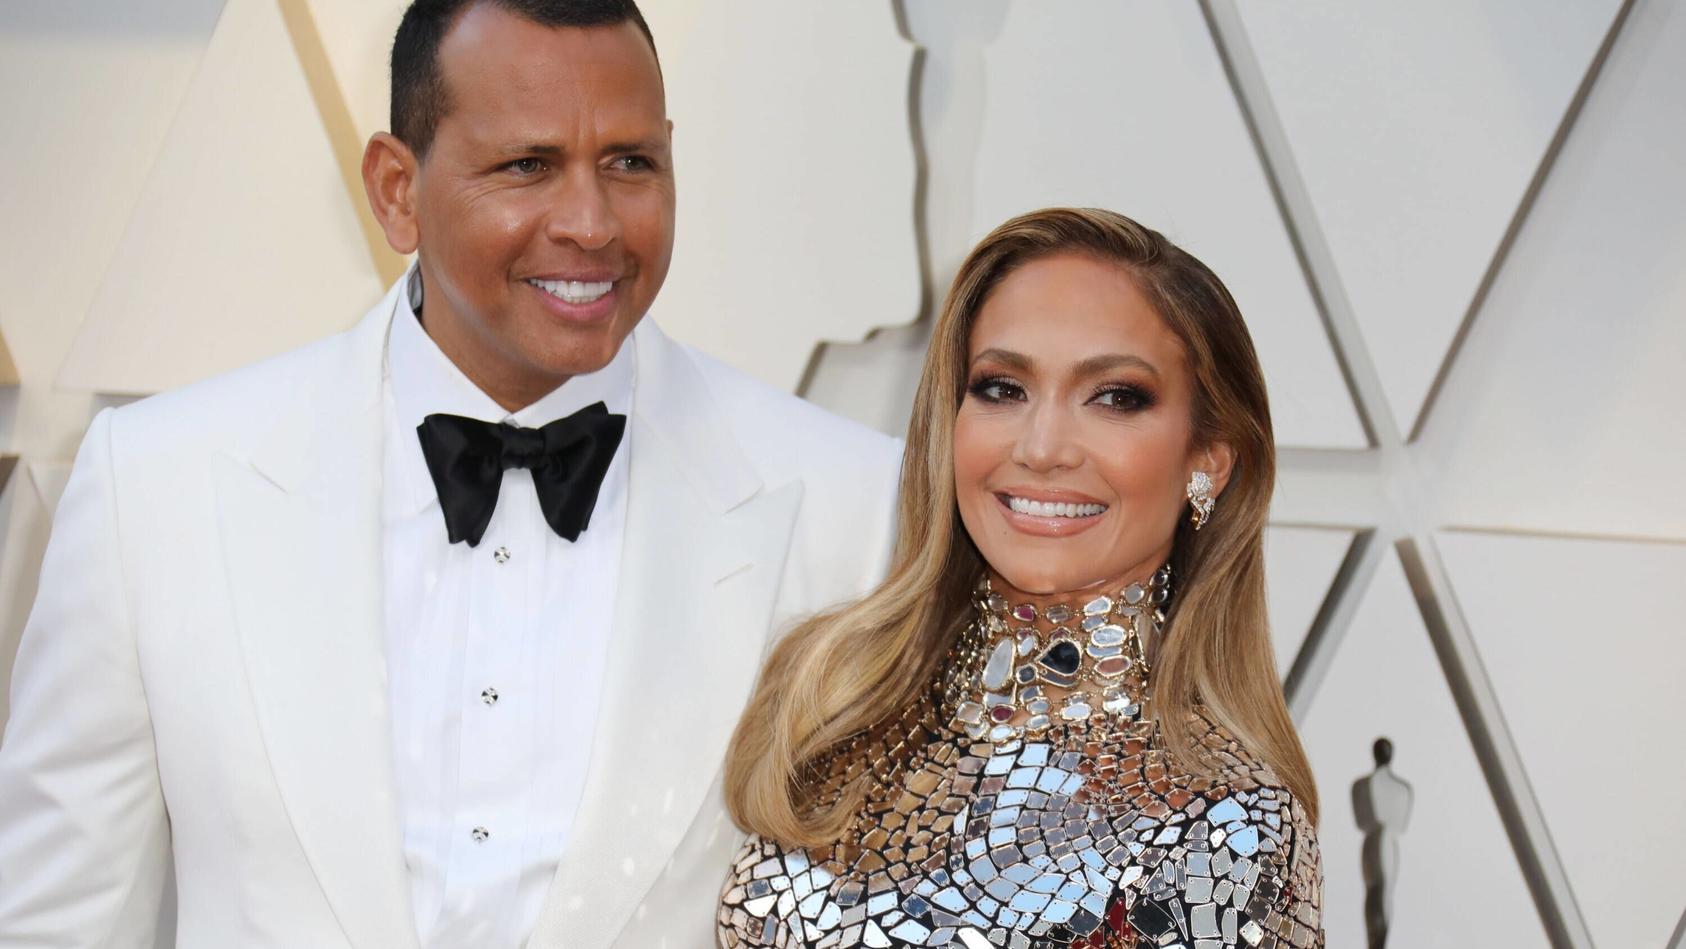  Jennifer Lopez, Alex Rodriguez at arrivals for The 91st Academy Awards - Arrivals, The Dolby Theatre at Hollywood and Highland Center, Los Angeles, CA February 24, 2019. Photo By: Jef Hernandez/Everett Collection For usage credit please use Jef Hern